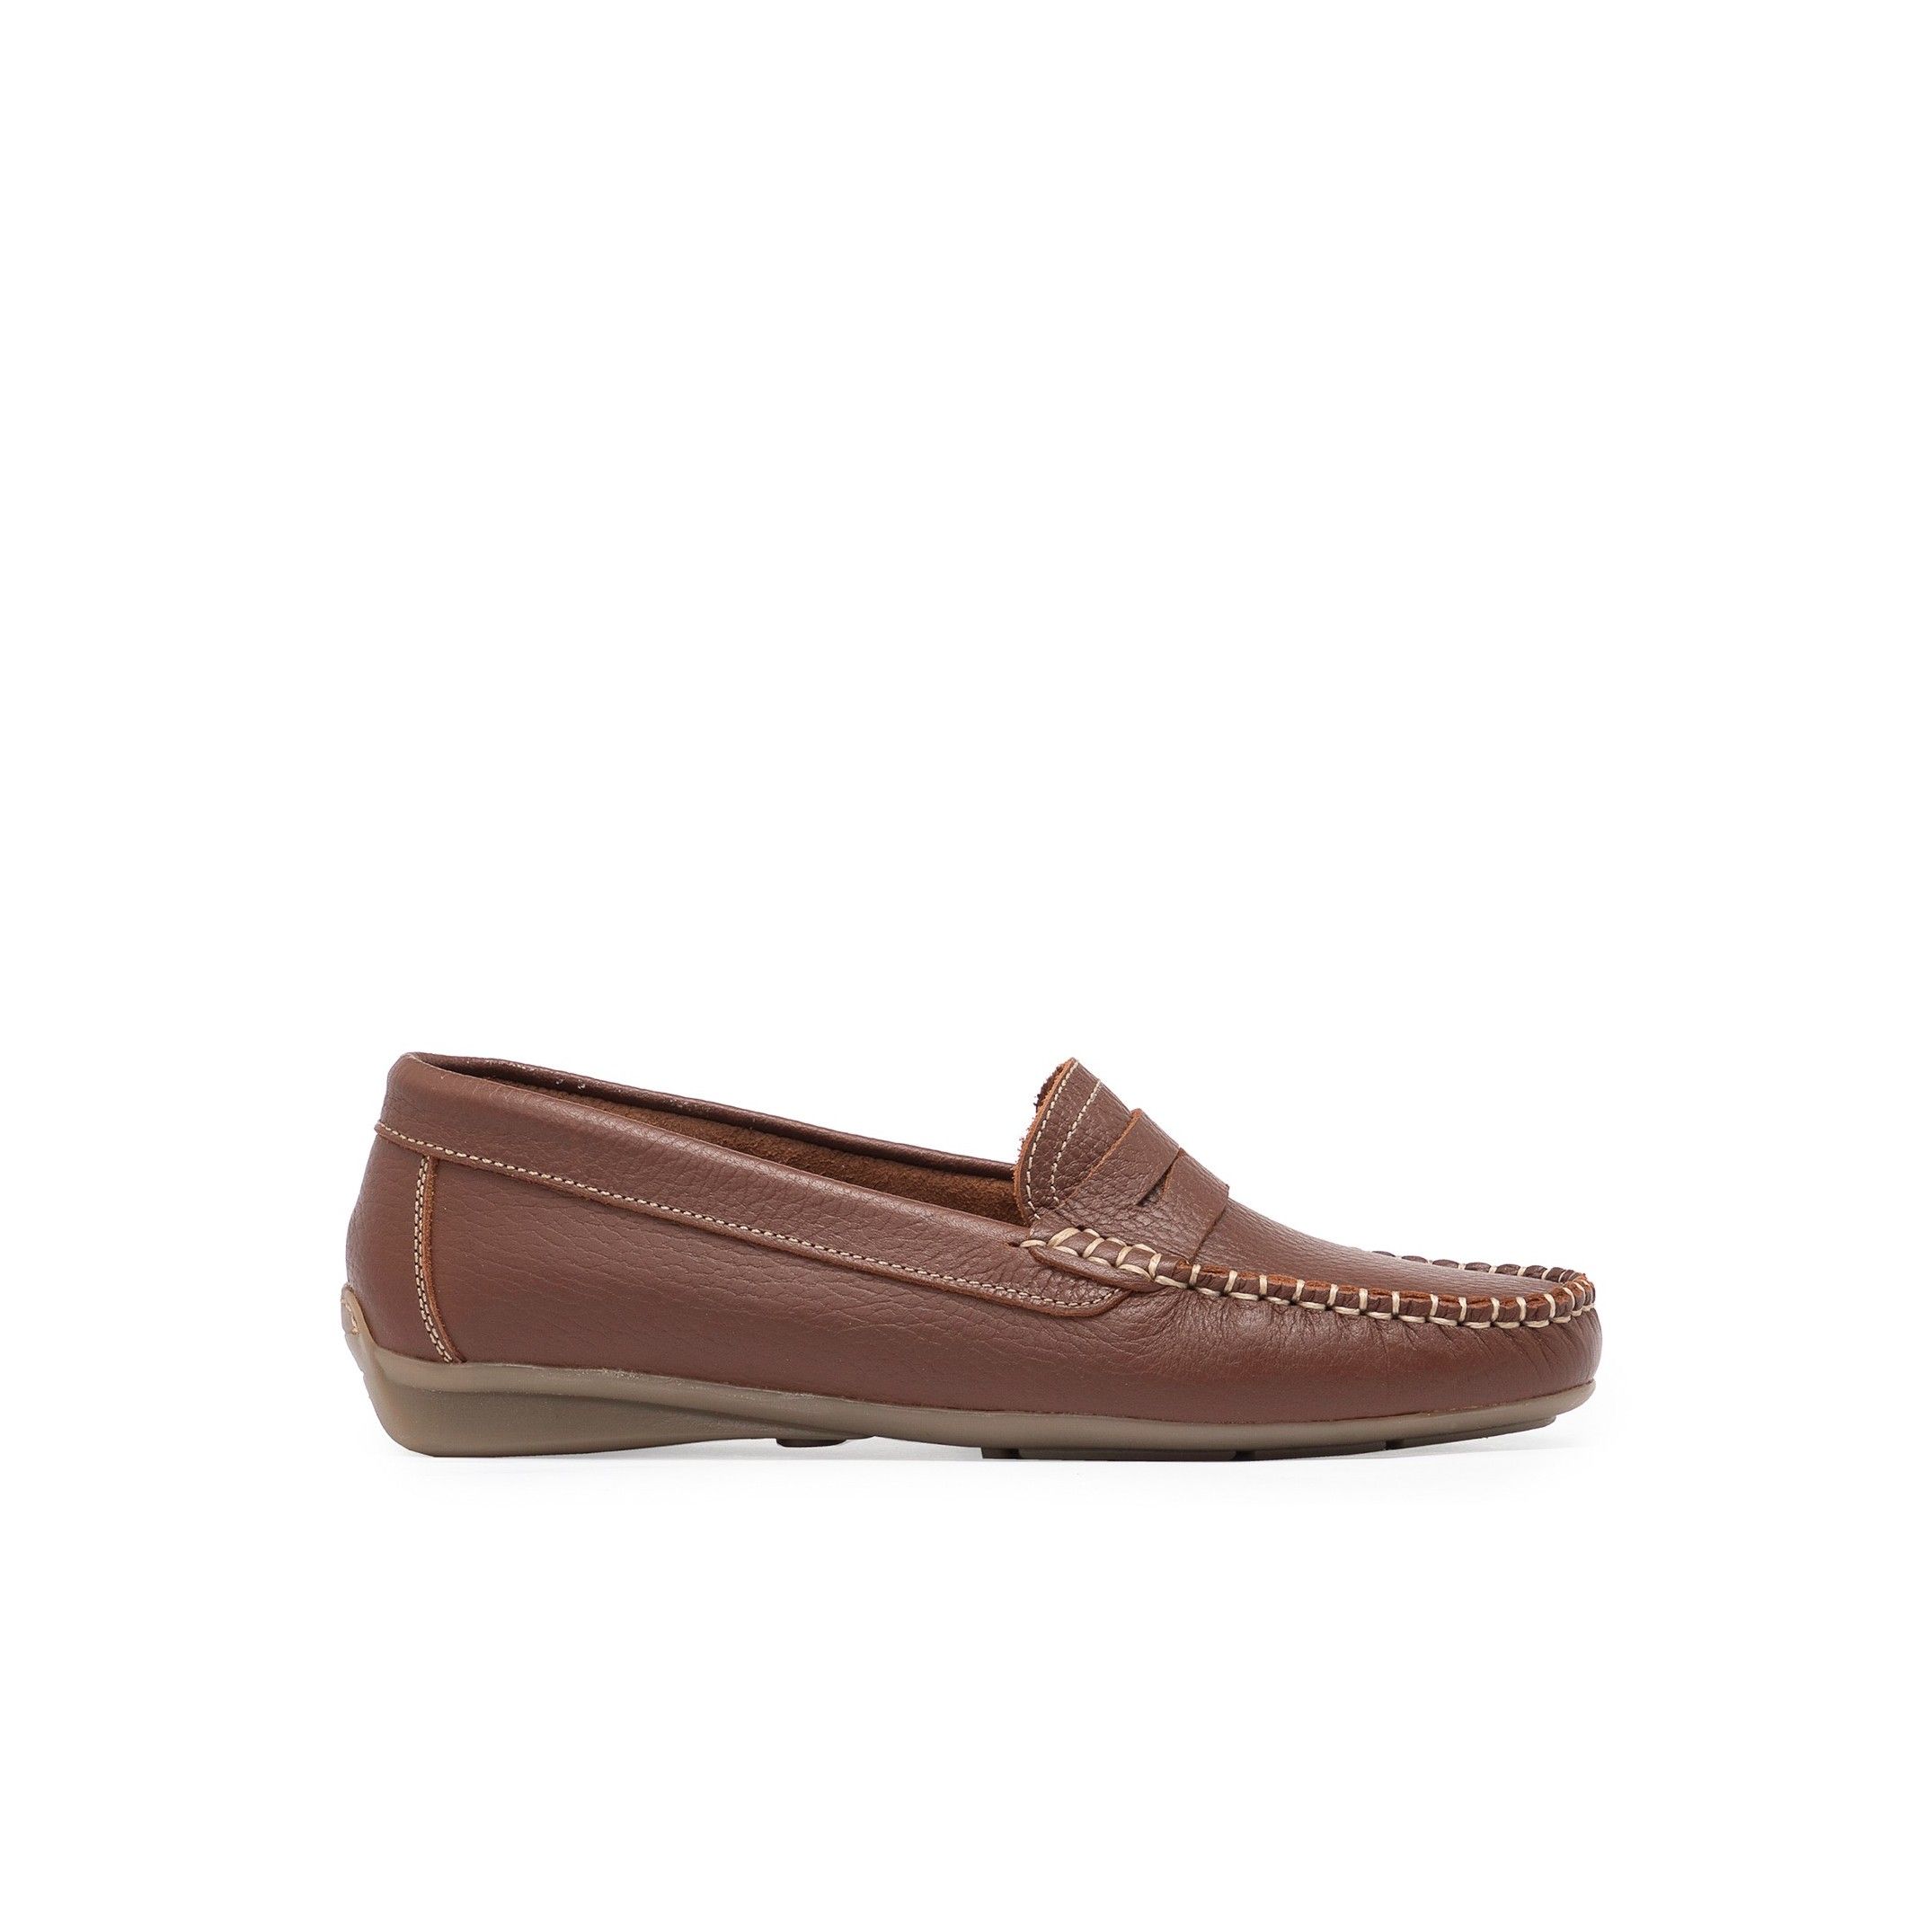 Nappa leather Loafer with mask, by Son Castellanisimos. Upper made of cowhide leather. Inner lining and insole made of cowhide leather. Sole material: synthetic and non slip. Heel height: 2 cm. Designed and made in Spain.